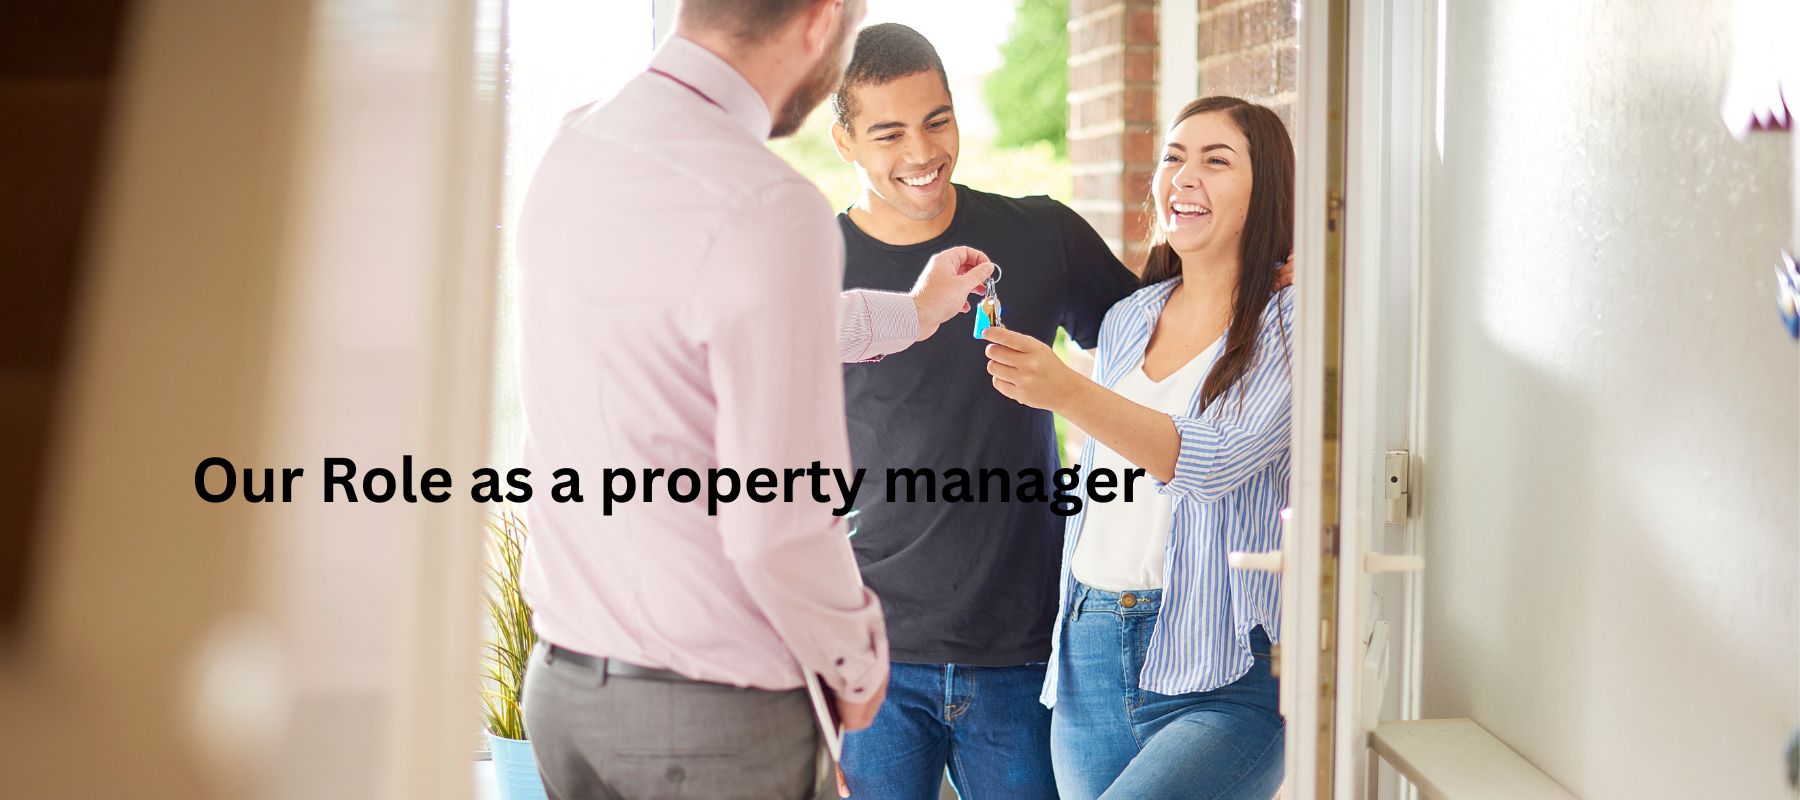 Property Management in Laois